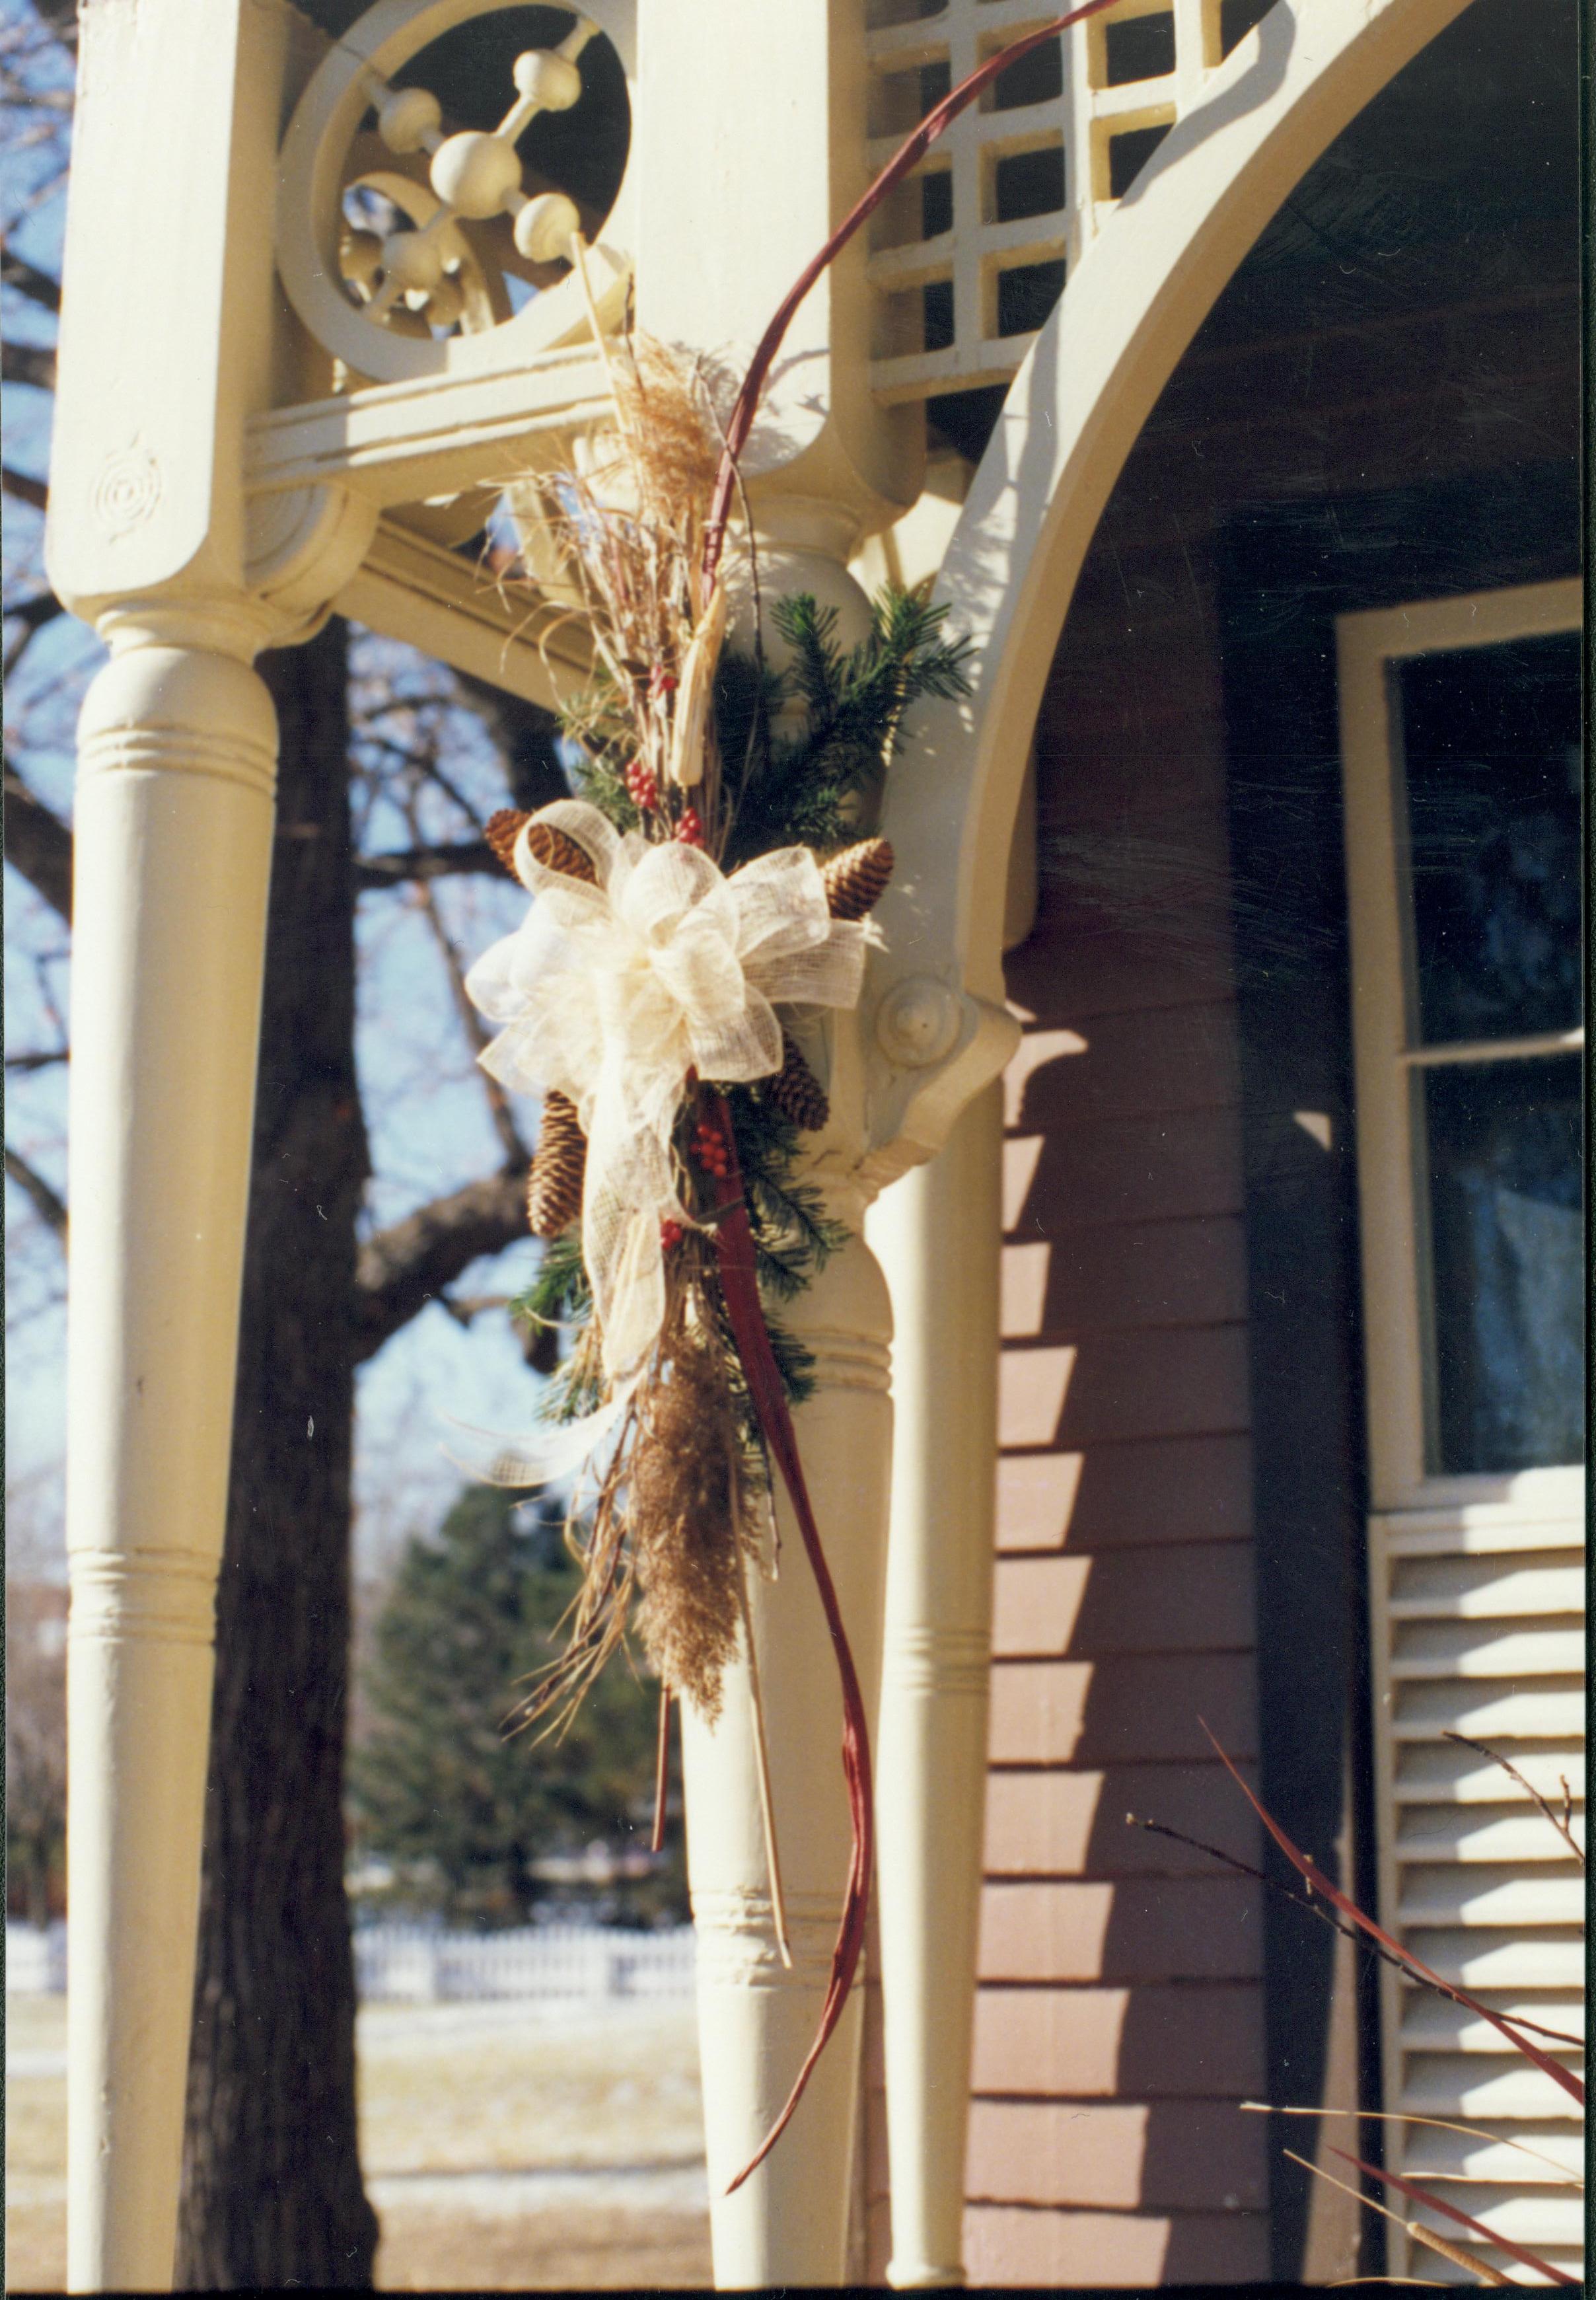 Lincoln Home NHS- Christmas in Lincoln Neighborhood Looking south west, Christmas decor on porch overhang of Dean house. Detail. Christmas, neighborhood, Dean, porch, decor, detail